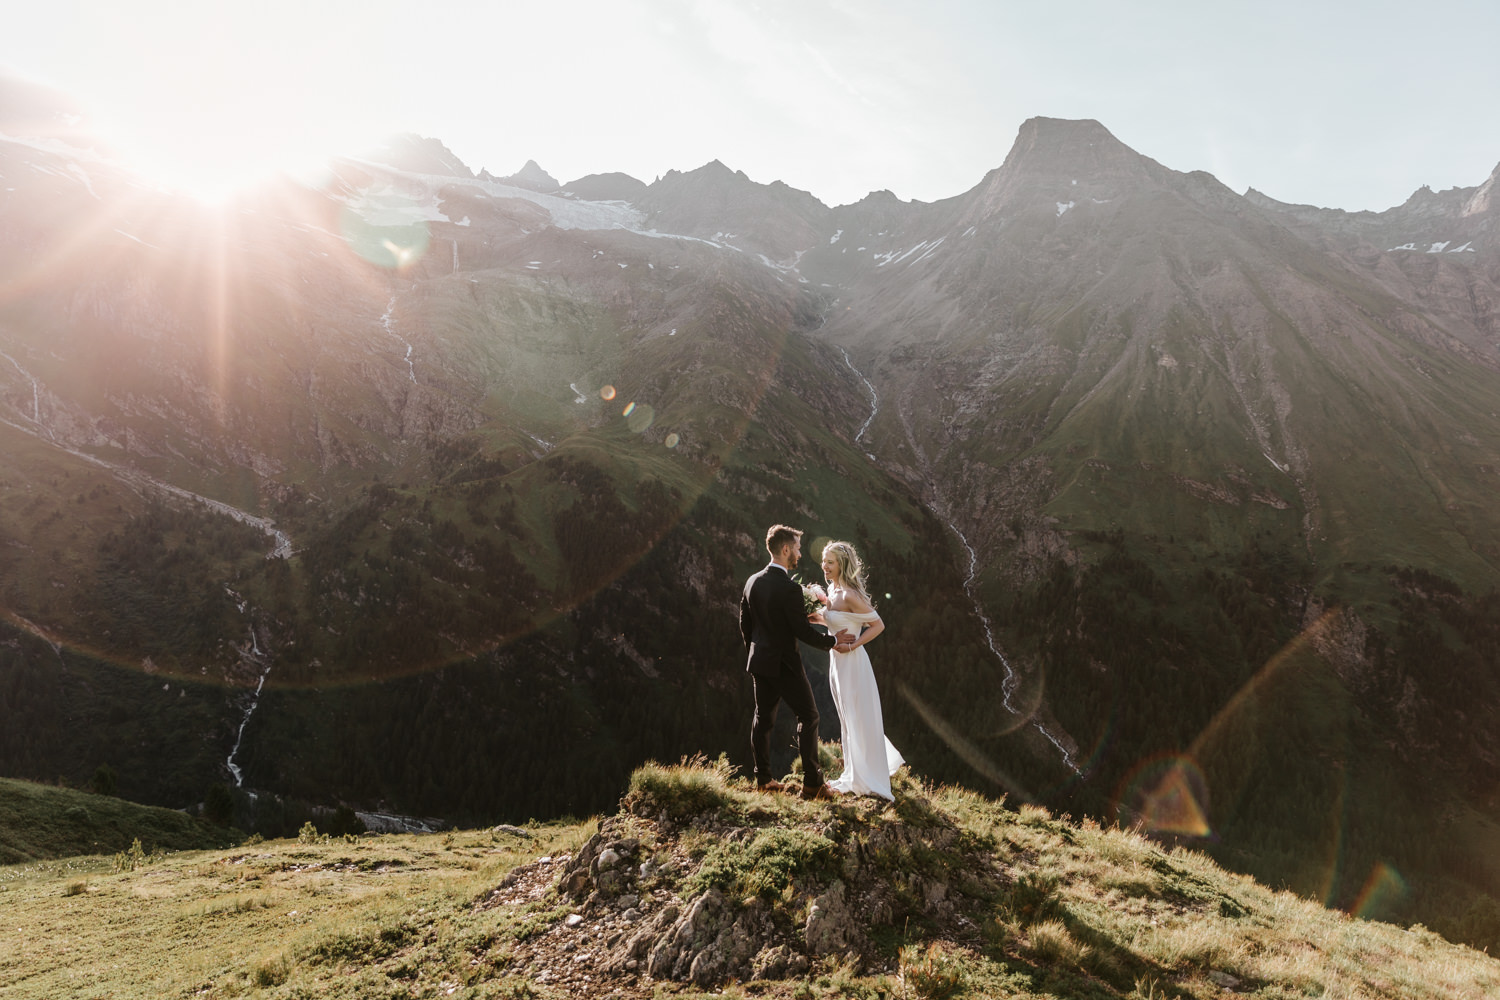 A couple hiking in a white dress and black suit stand on a mountain in August with a bright sun flaring above the peaks on their elopement day